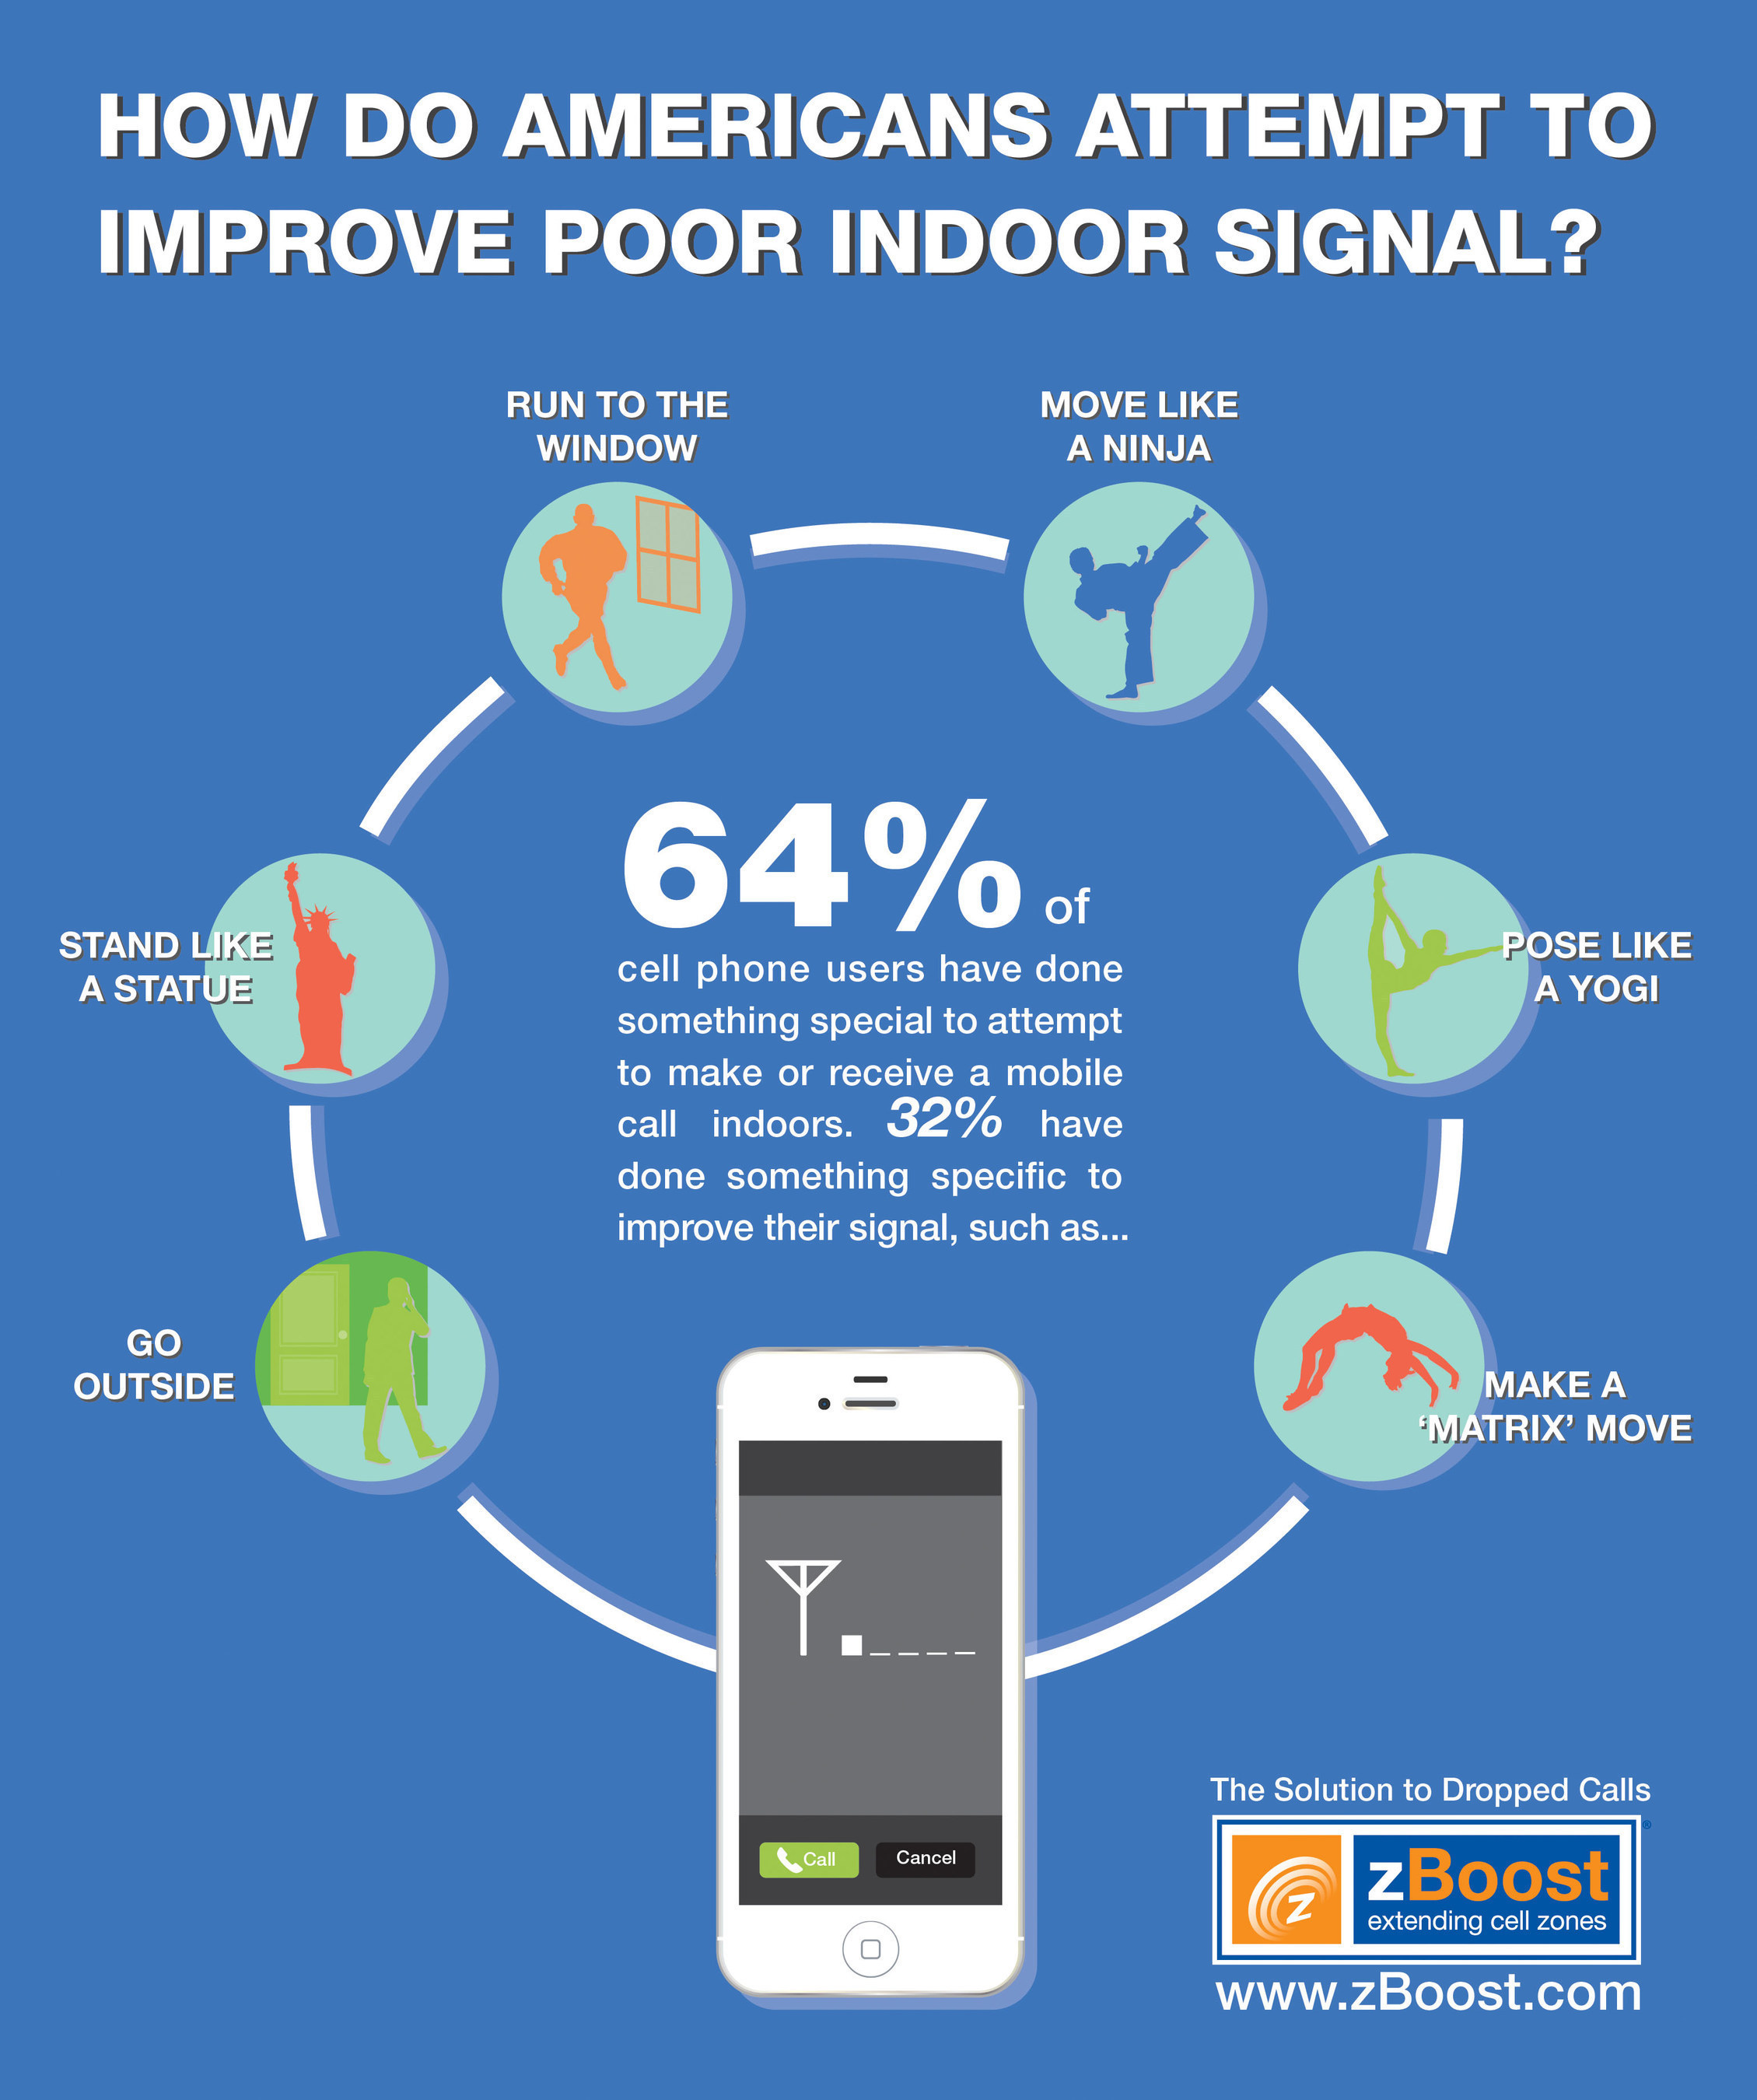 How do Americans Attempt to Improve Poor Indoor Signal?